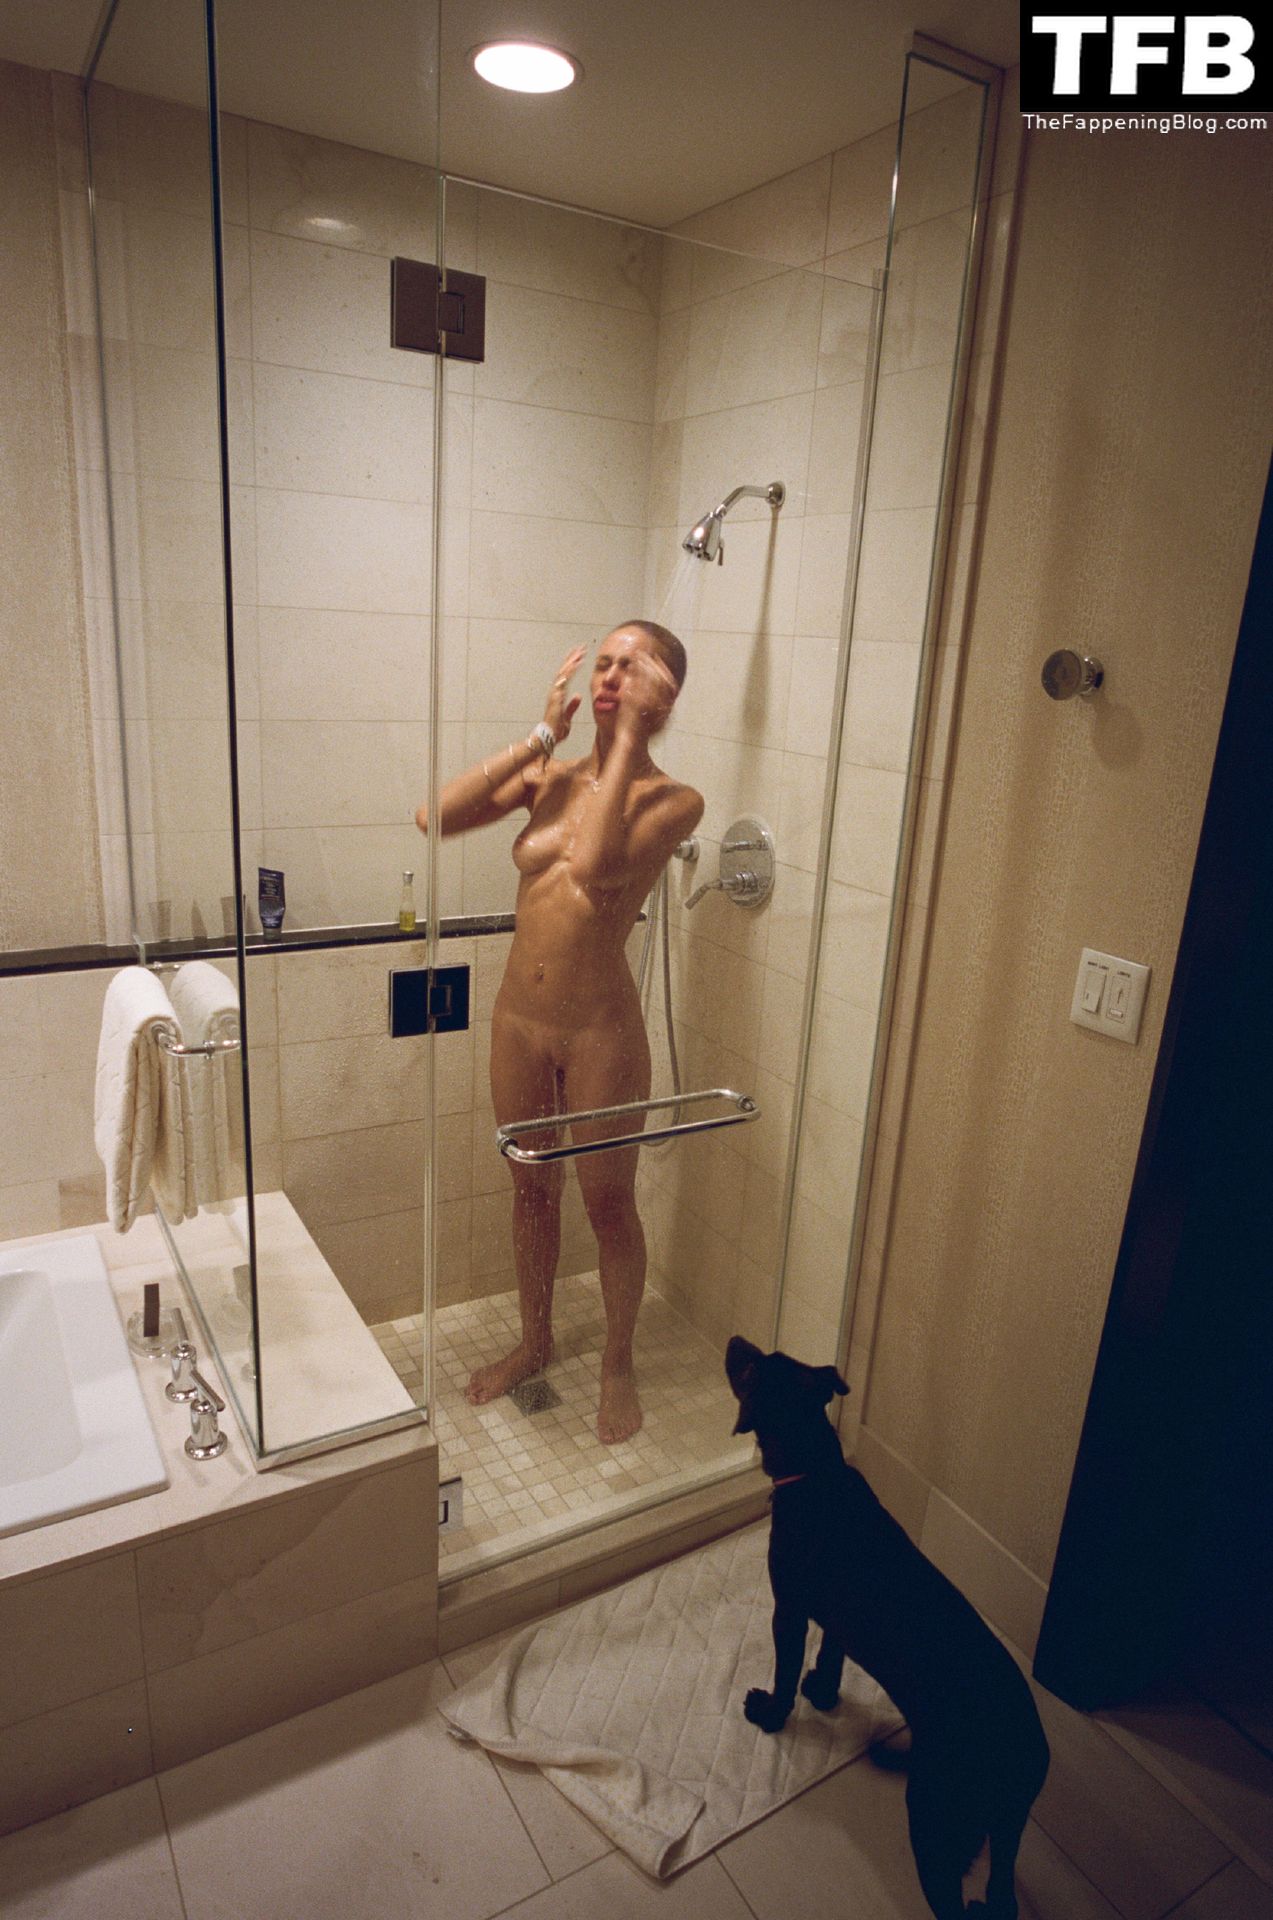 Adwoa-Aboah-Nude-Sexy-Leaked-The-Fappening-Blog-5.jpg